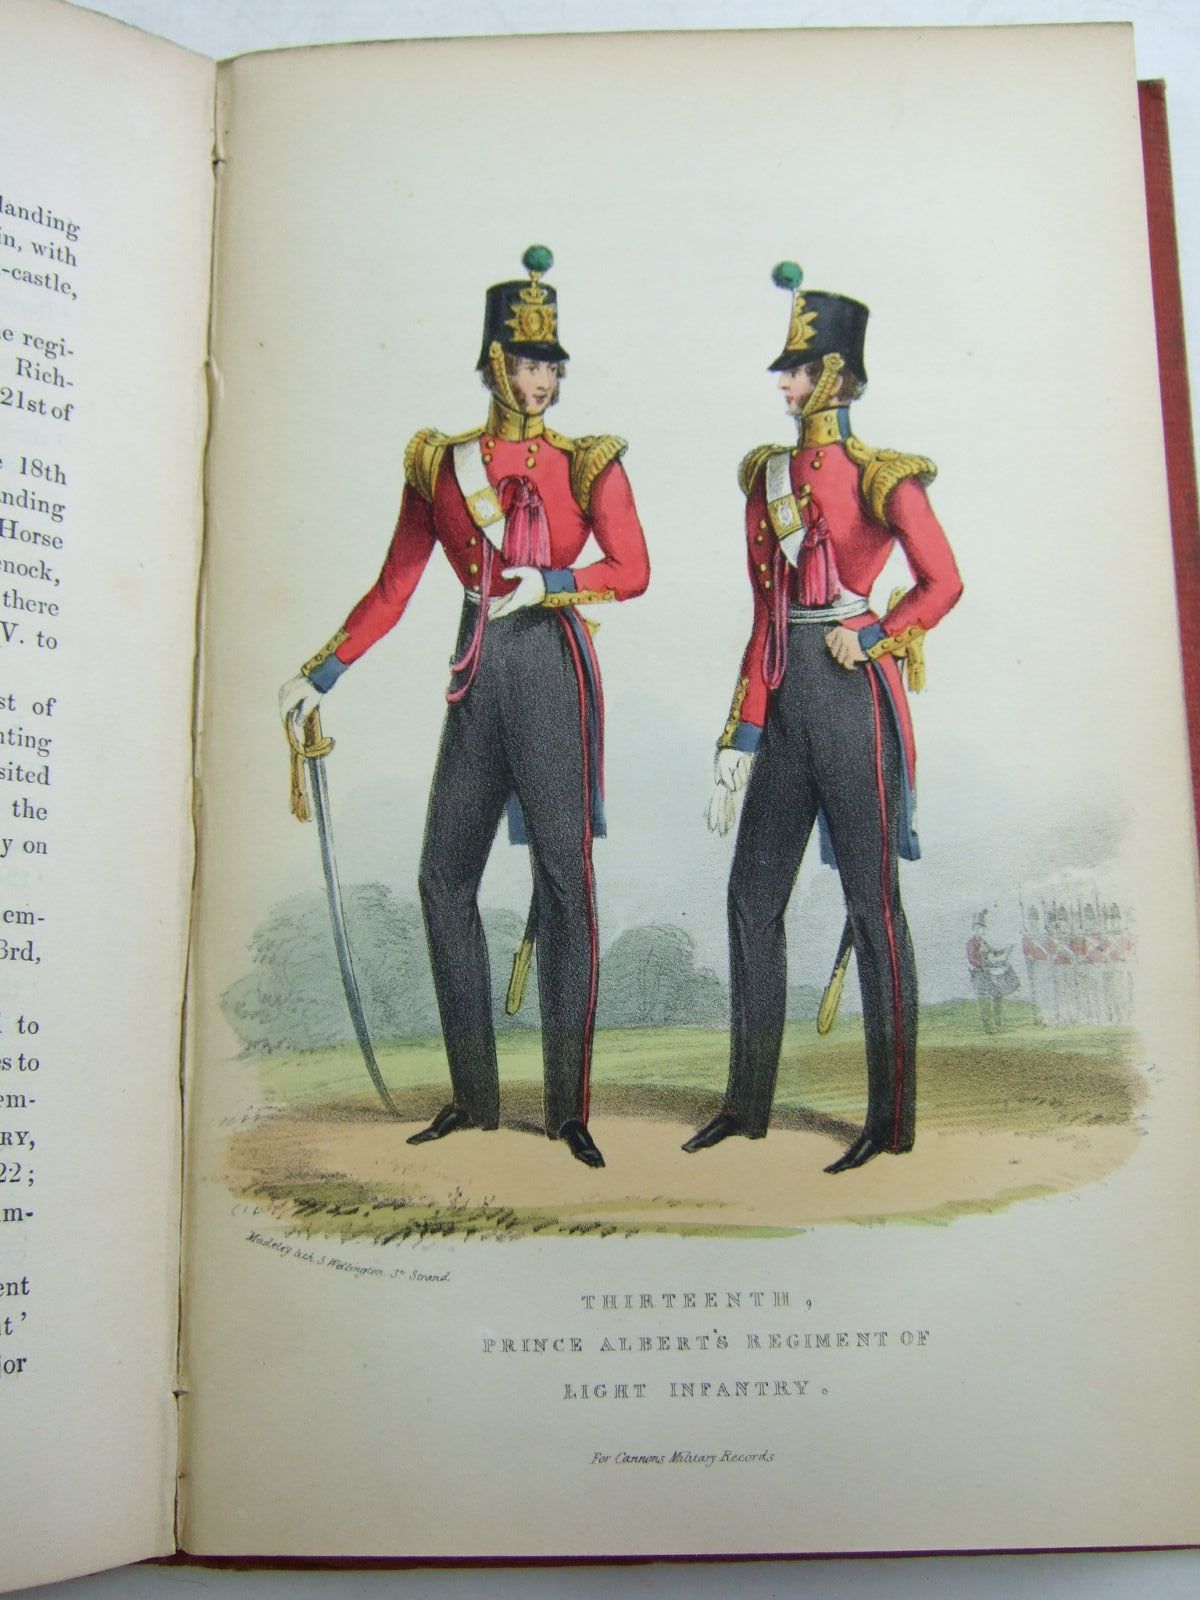 Photo of HISTORICAL RECORD OF THE THIRTEENTH, FIRST SOMERSET, THE PRINCE ALBERT'S REGIMENT OF LIGHT INFANTRY written by Cannon, Richard published by Parker, Furnivall & Parker (STOCK CODE: 2109177)  for sale by Stella & Rose's Books